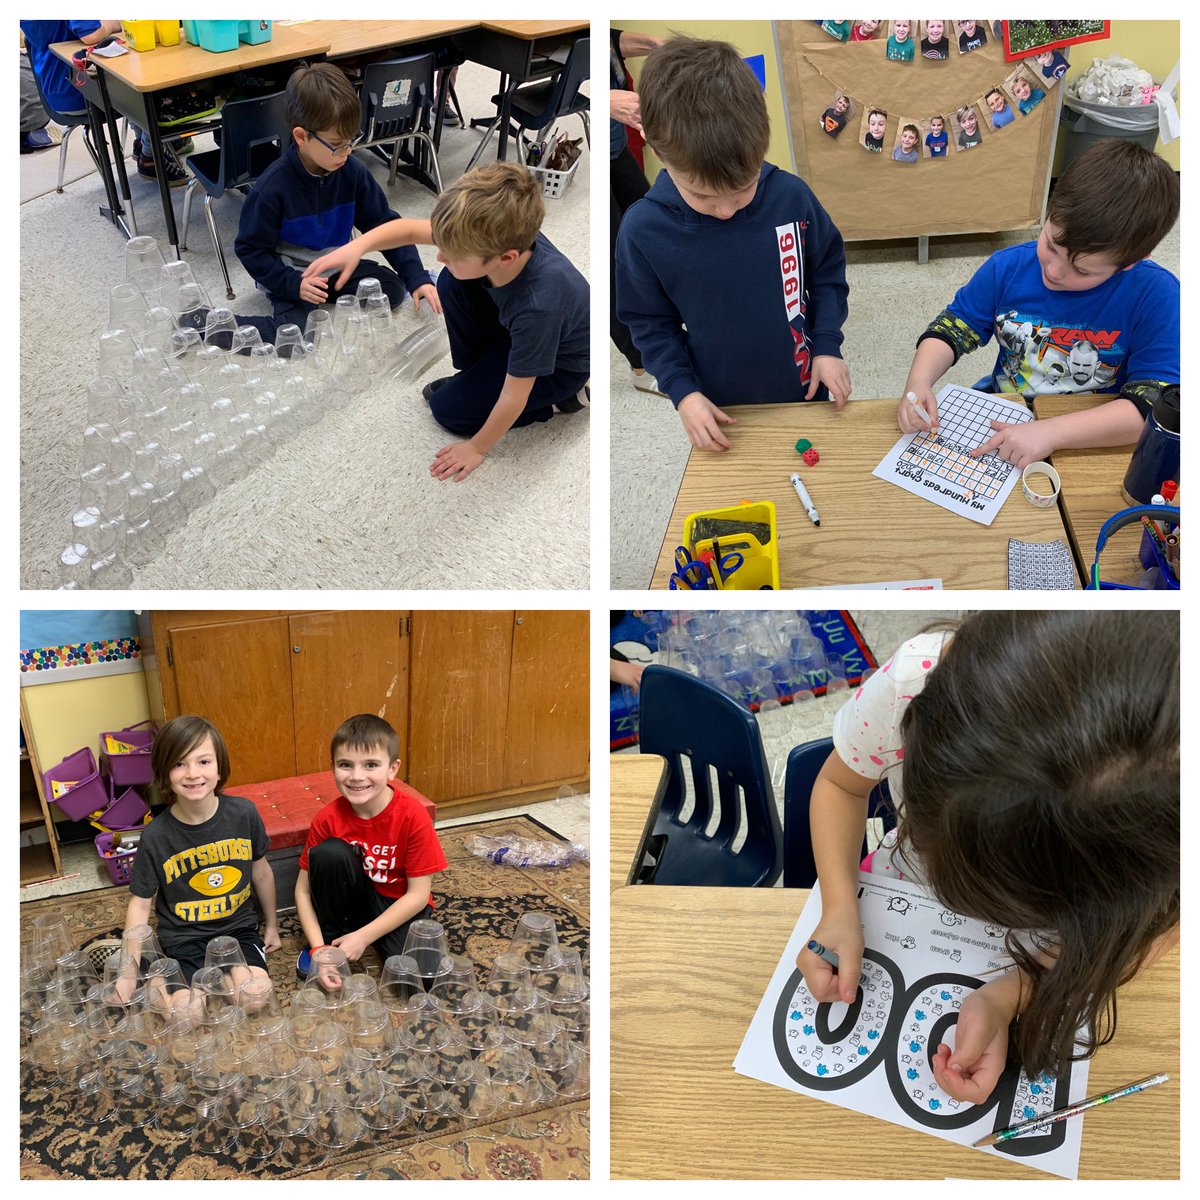 @NewMonmouthElem G1 Ss had fun on the 100th Day! #mtpspride #100dayssmarter